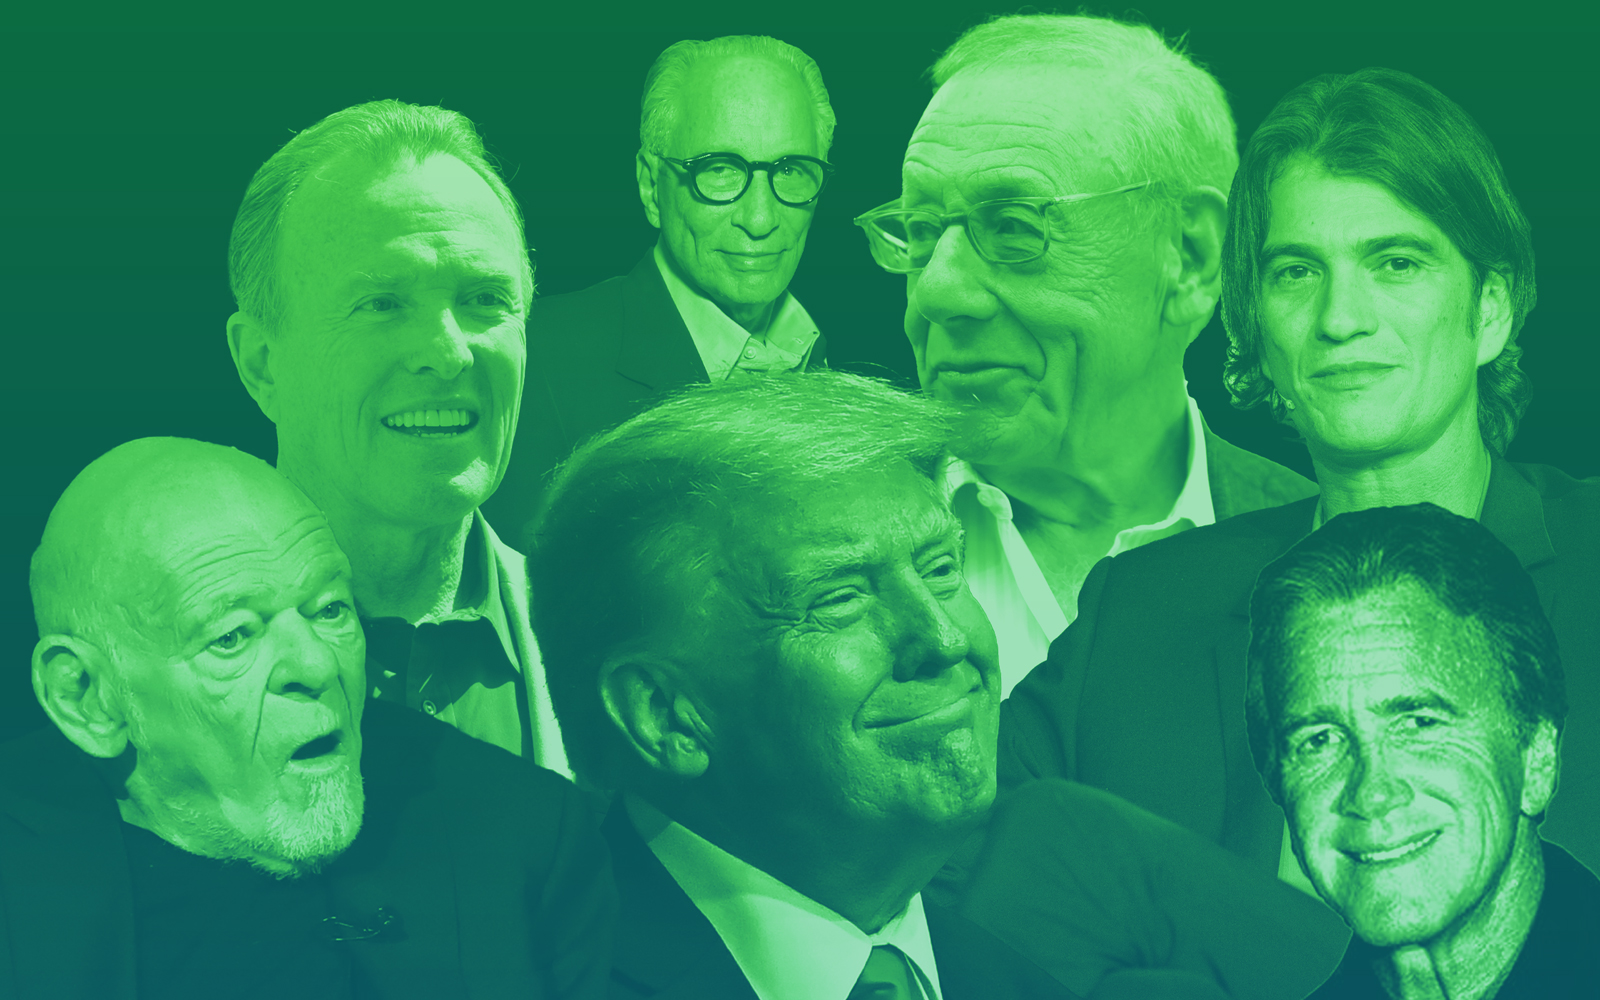 Check out some of the real estate tycoons on Forbes’ billionaires list